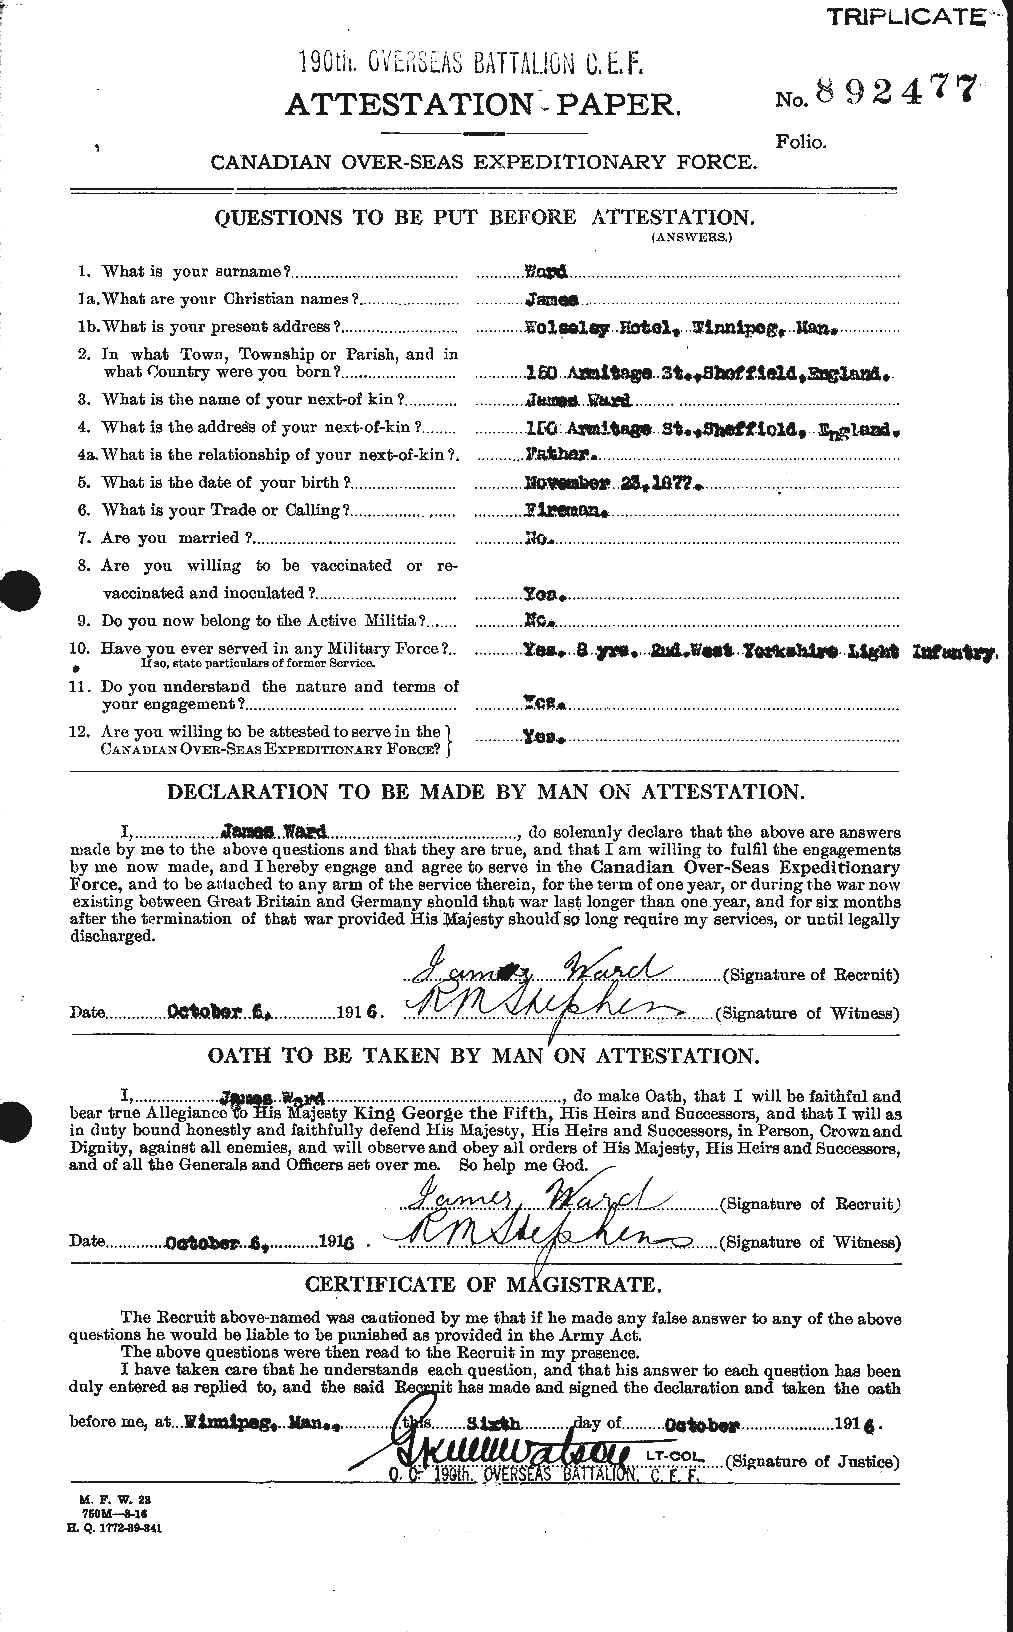 Personnel Records of the First World War - CEF 657879a